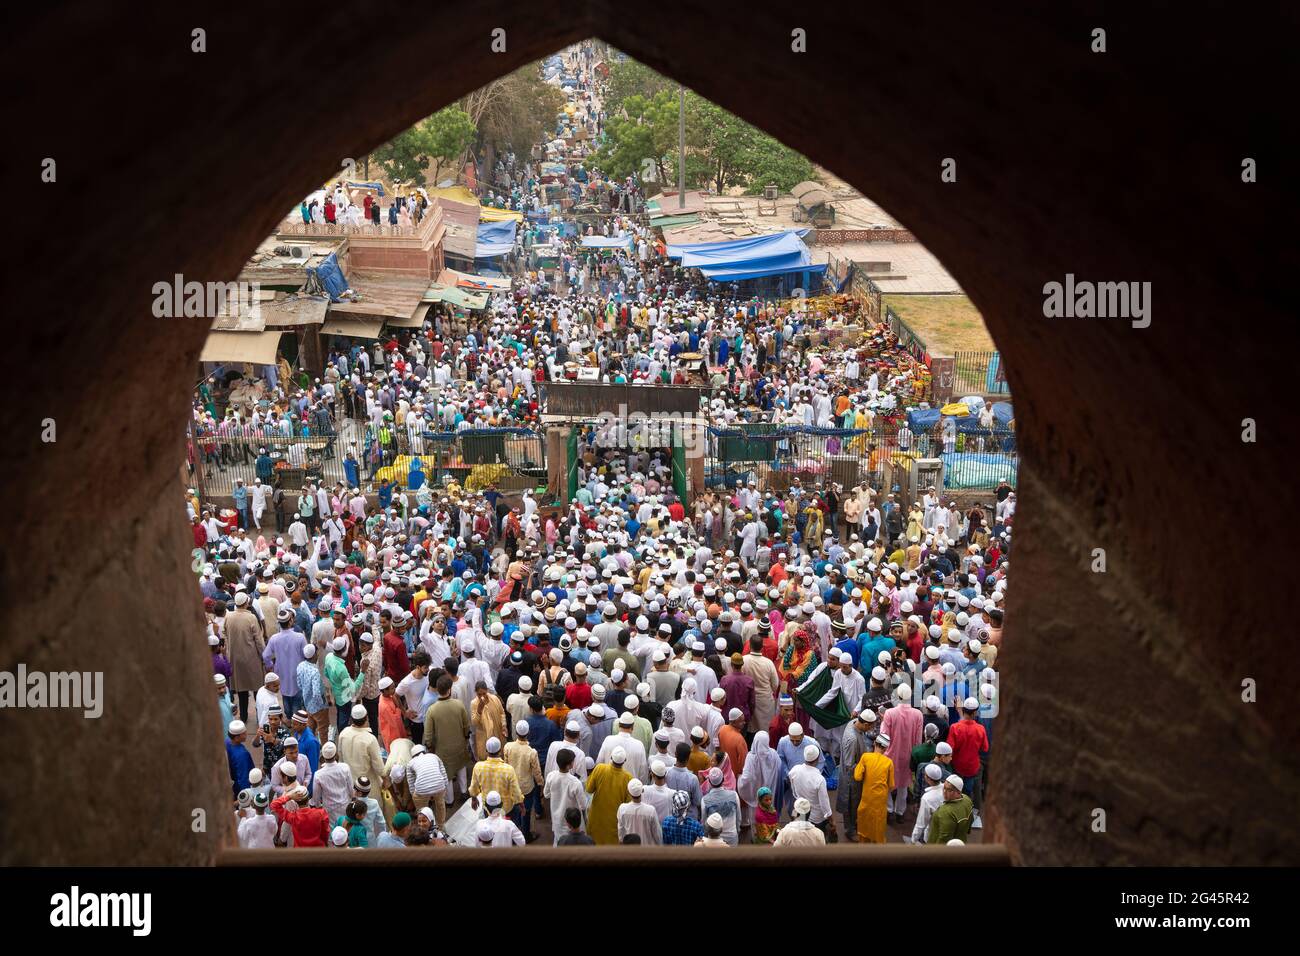 Muslim men leave after offering Eid-ul-Fitr namaz from the Masjid-i Jehan-Numa orJama Masjid of Delhi. It is one of the largest mosques in India Stock Photo